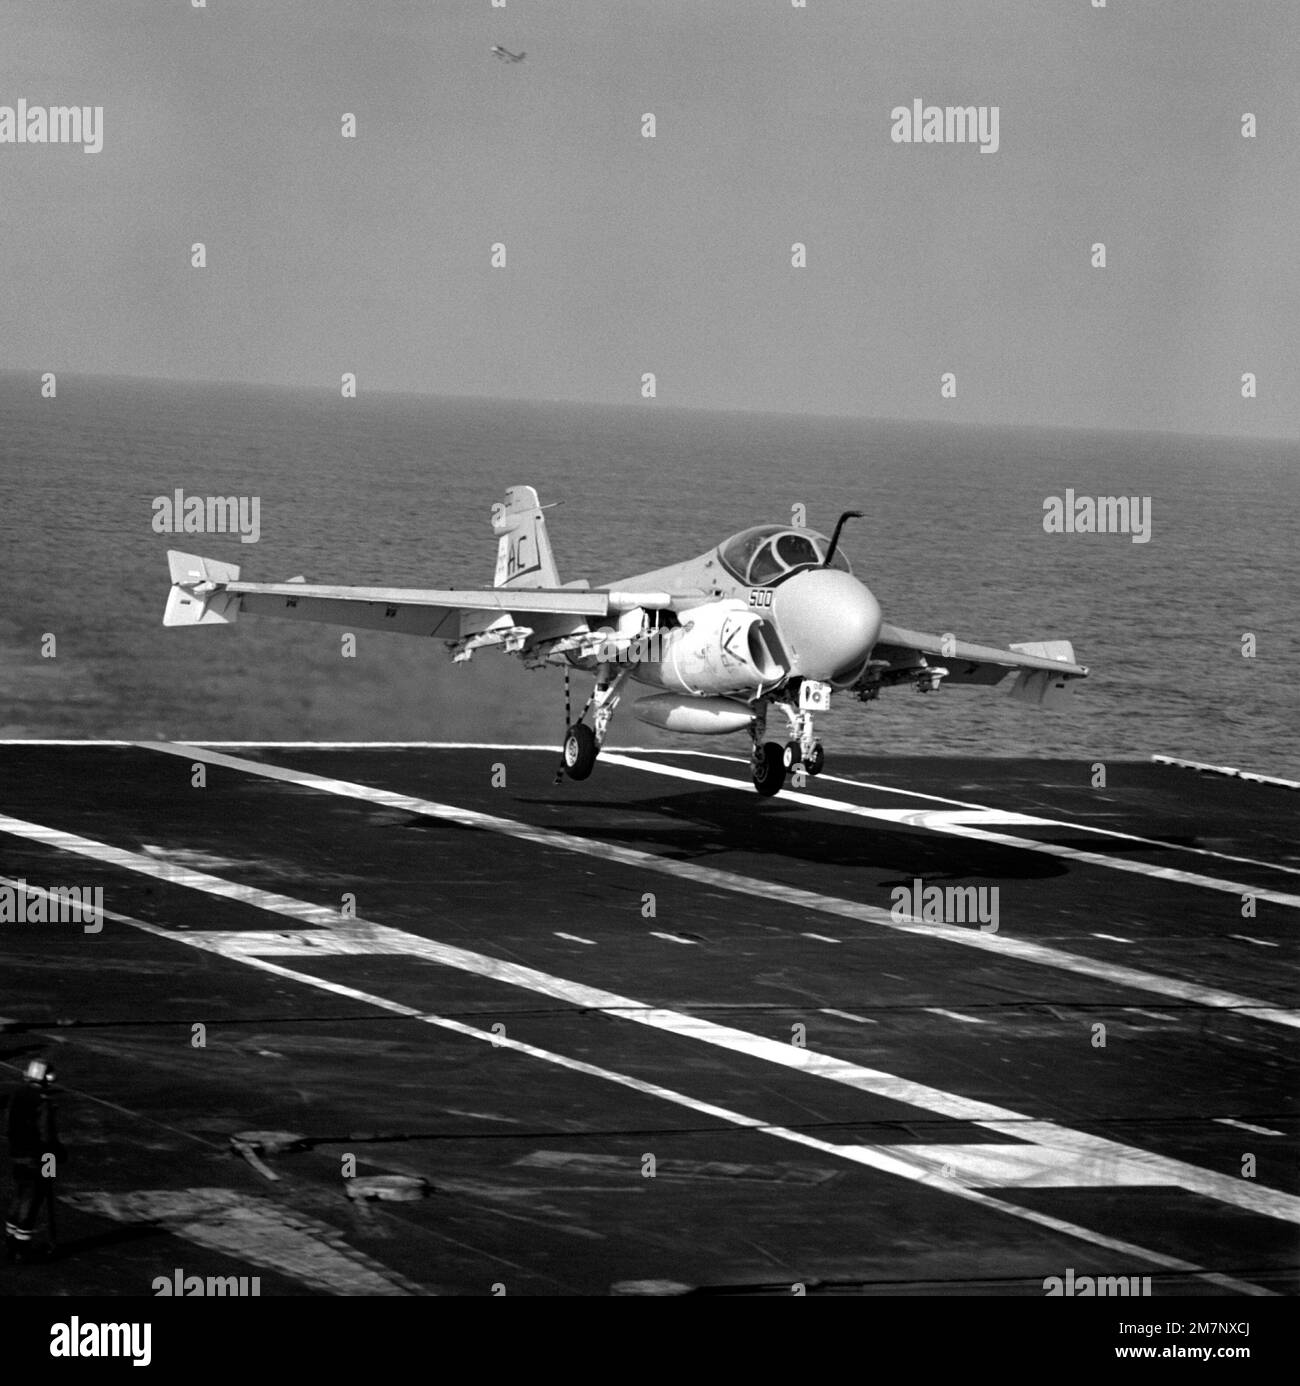 Right from view of an A-6E Intruder aircraft from Medium Attack Squadron 75 (VA-75) assigned to Carrier Air Wing 3 (CVW-3) landing aboard the aircraft carrier USS SARATOGA (CV-60) underway off the coast of Florida. Country: Atlantic Ocean (AOC) Stock Photo